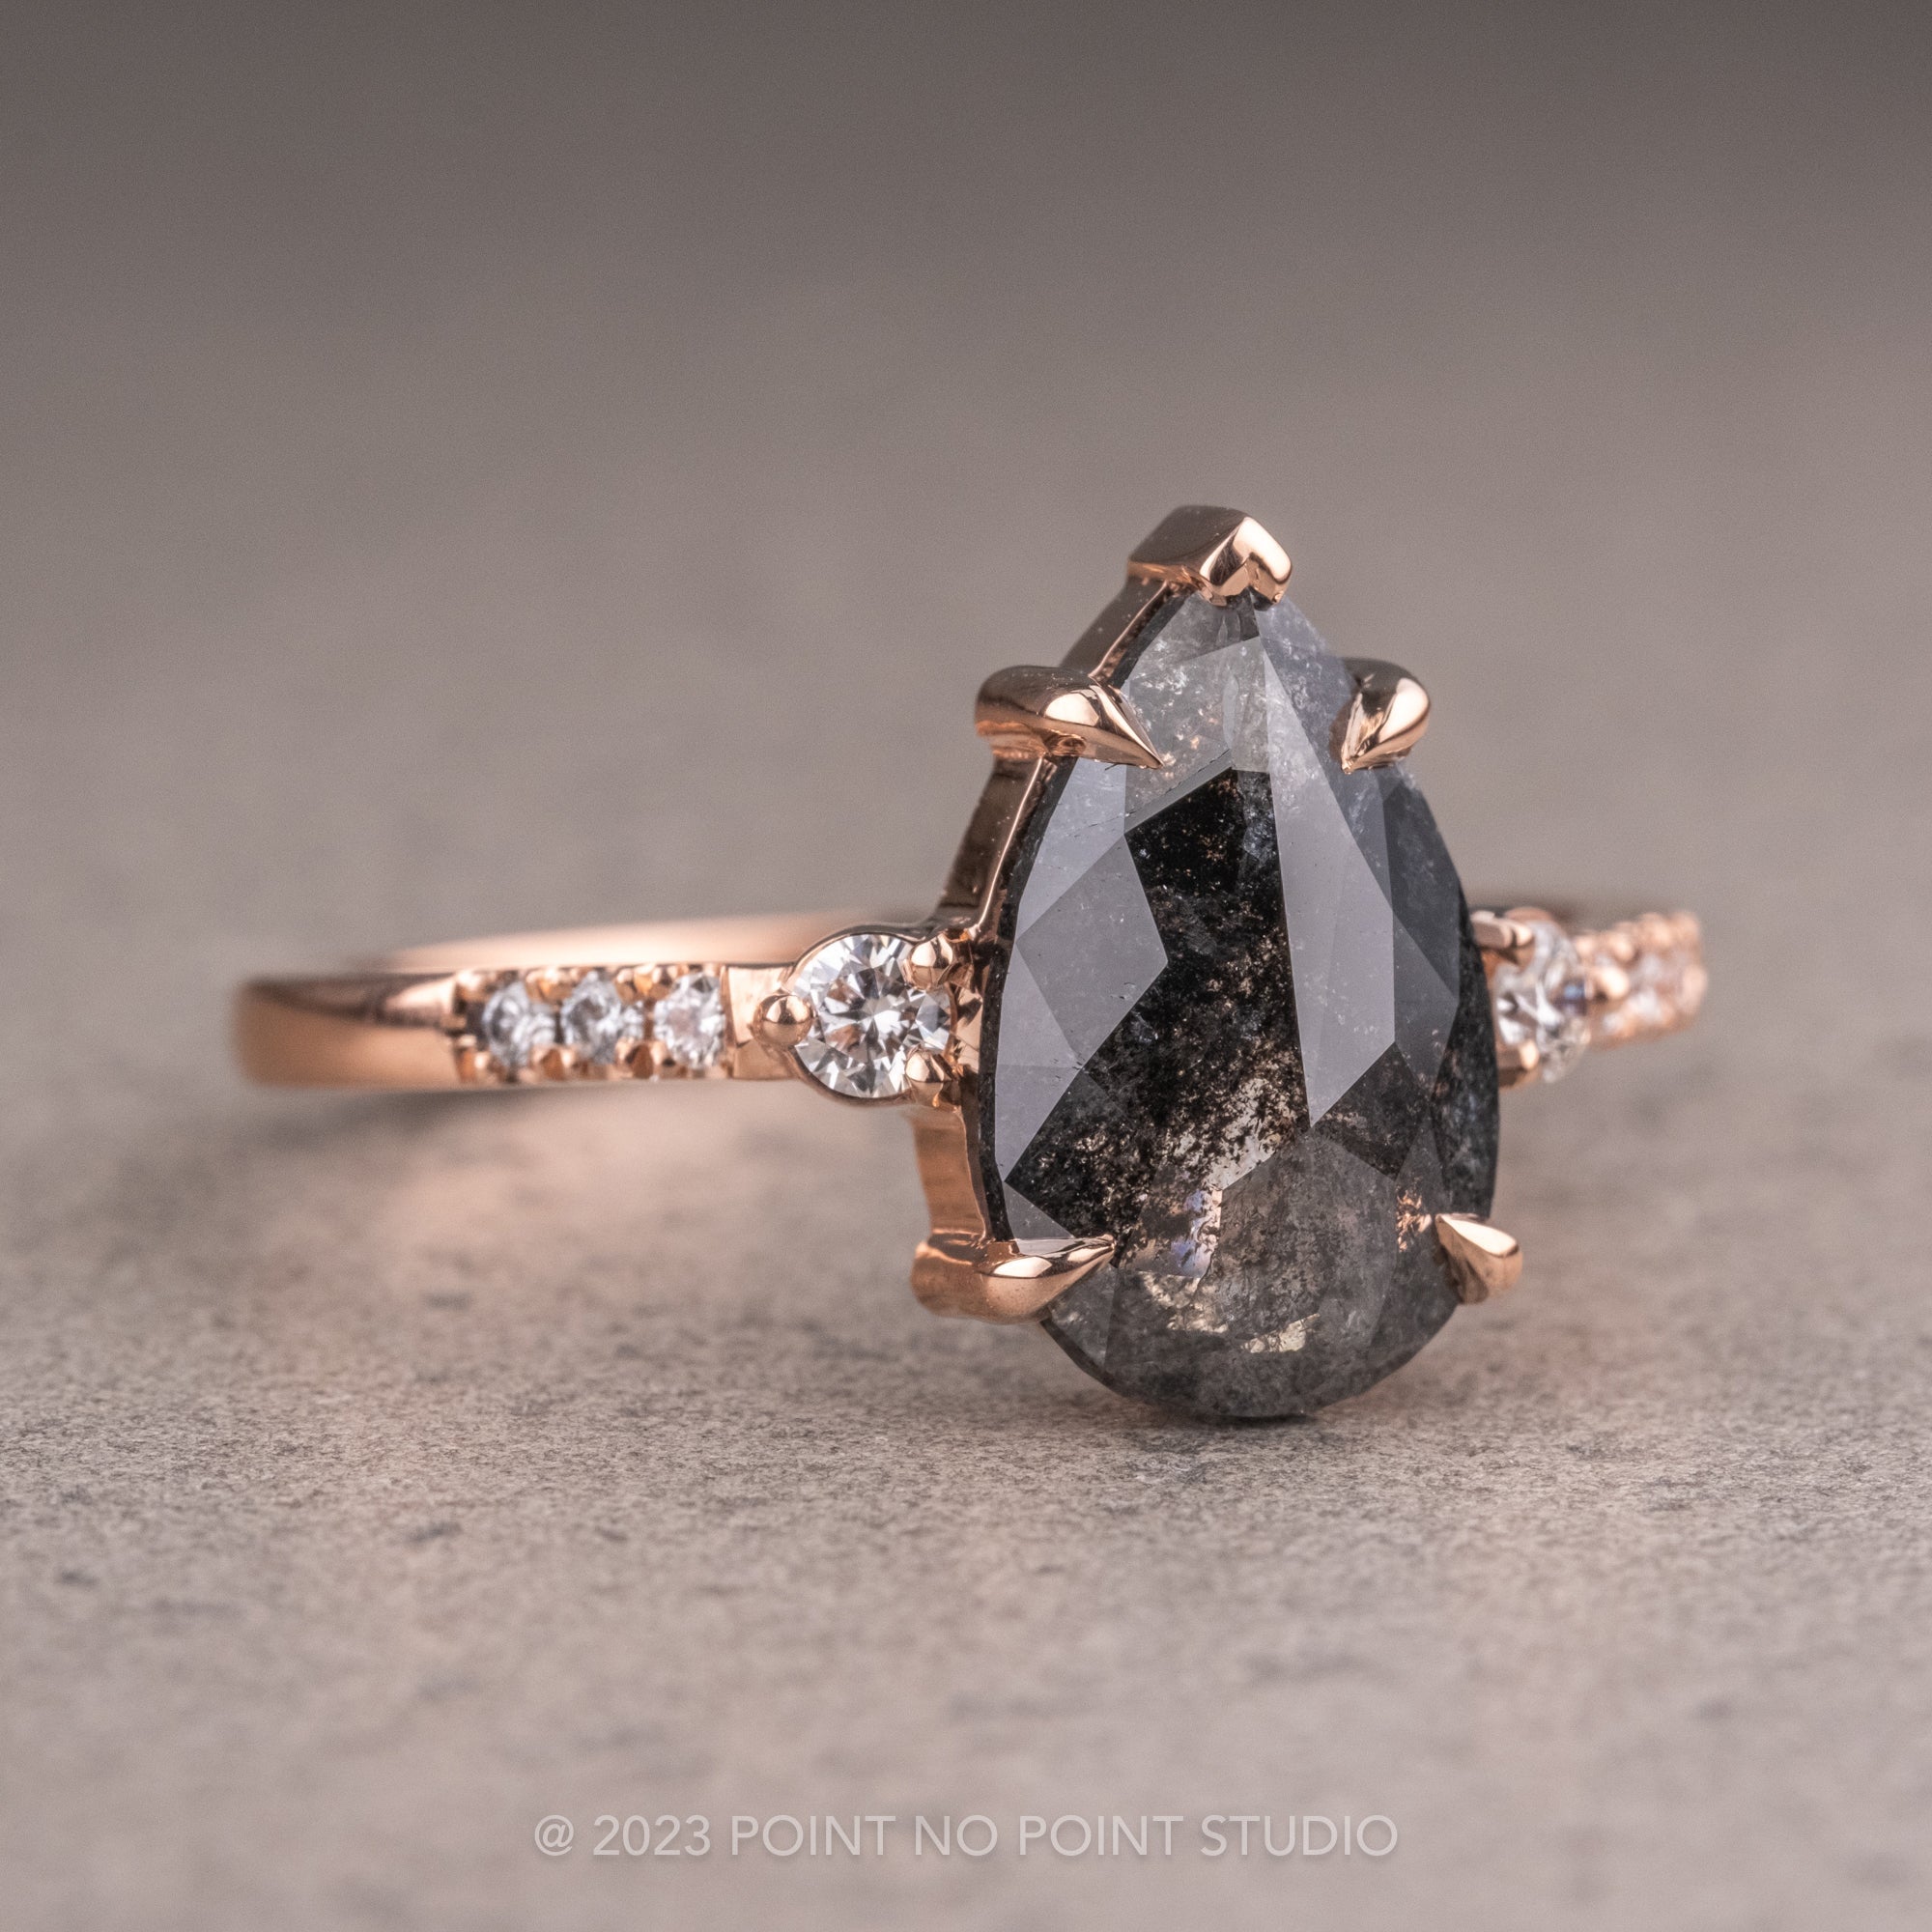 Black Diamond Engagement Rings: 8 Things to Know - Do Amore